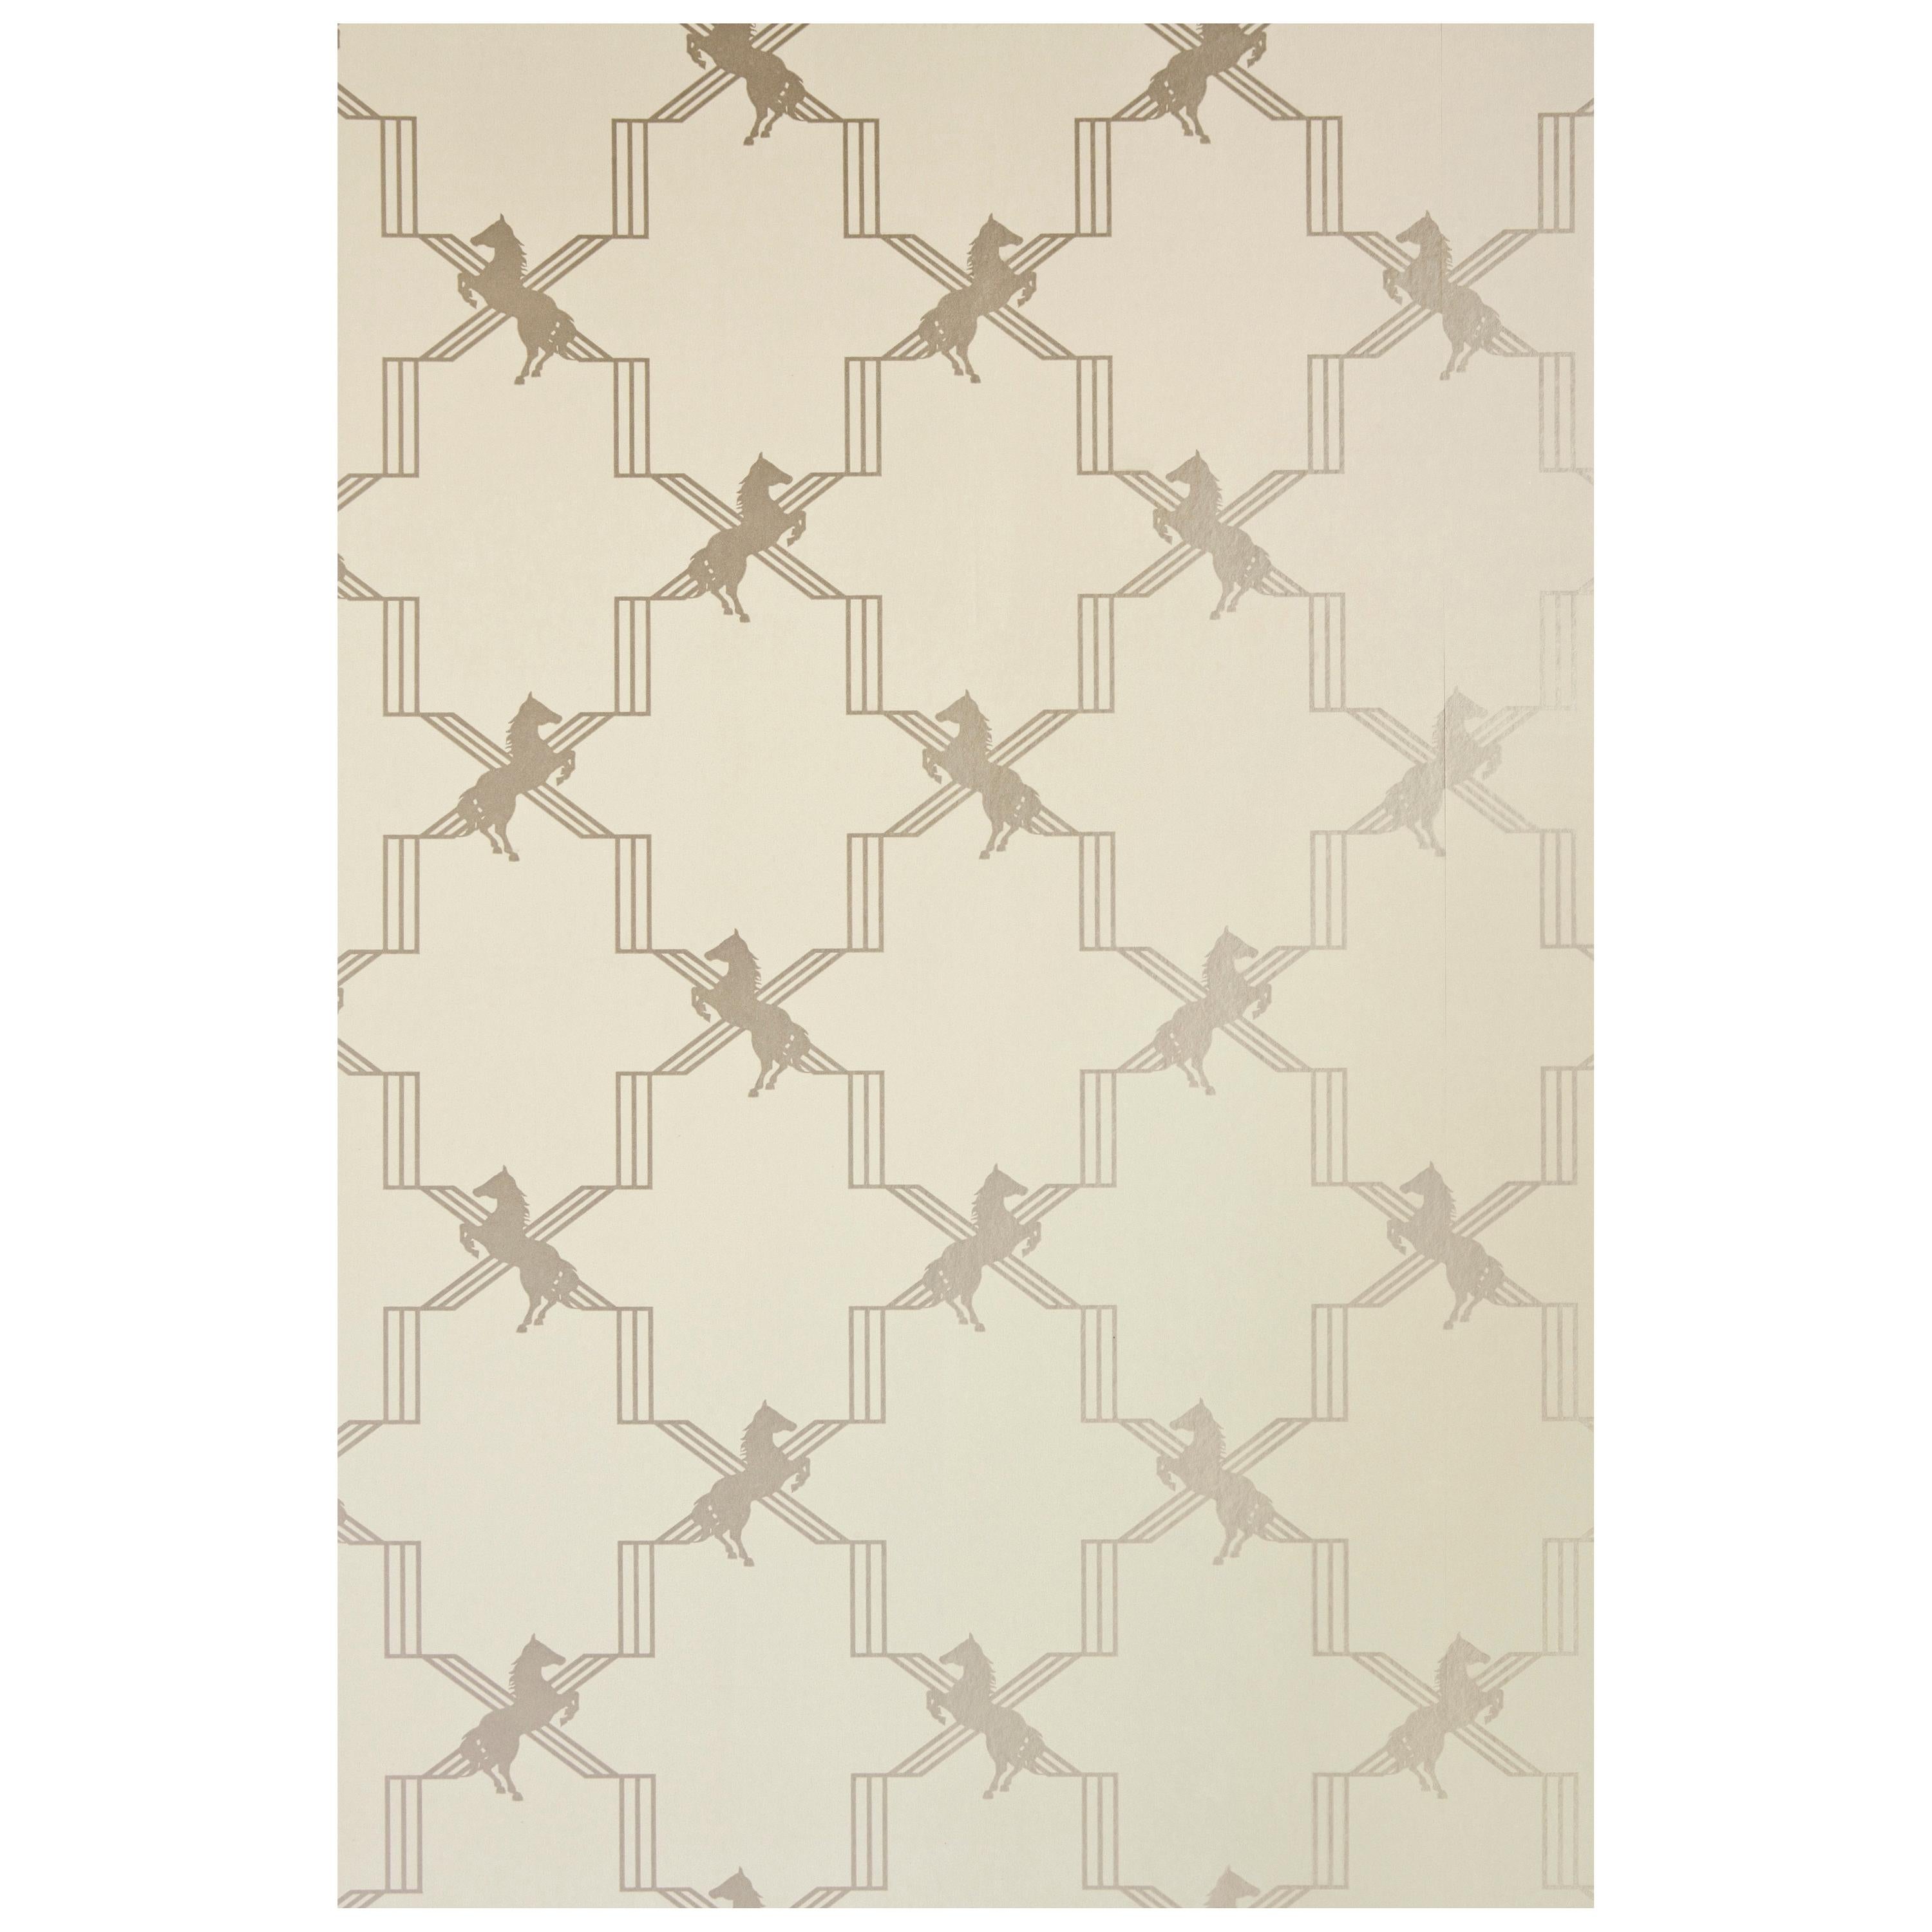 'Horse Trellis' Contemporary, Traditional Wallpaper in Metallic Stone For Sale